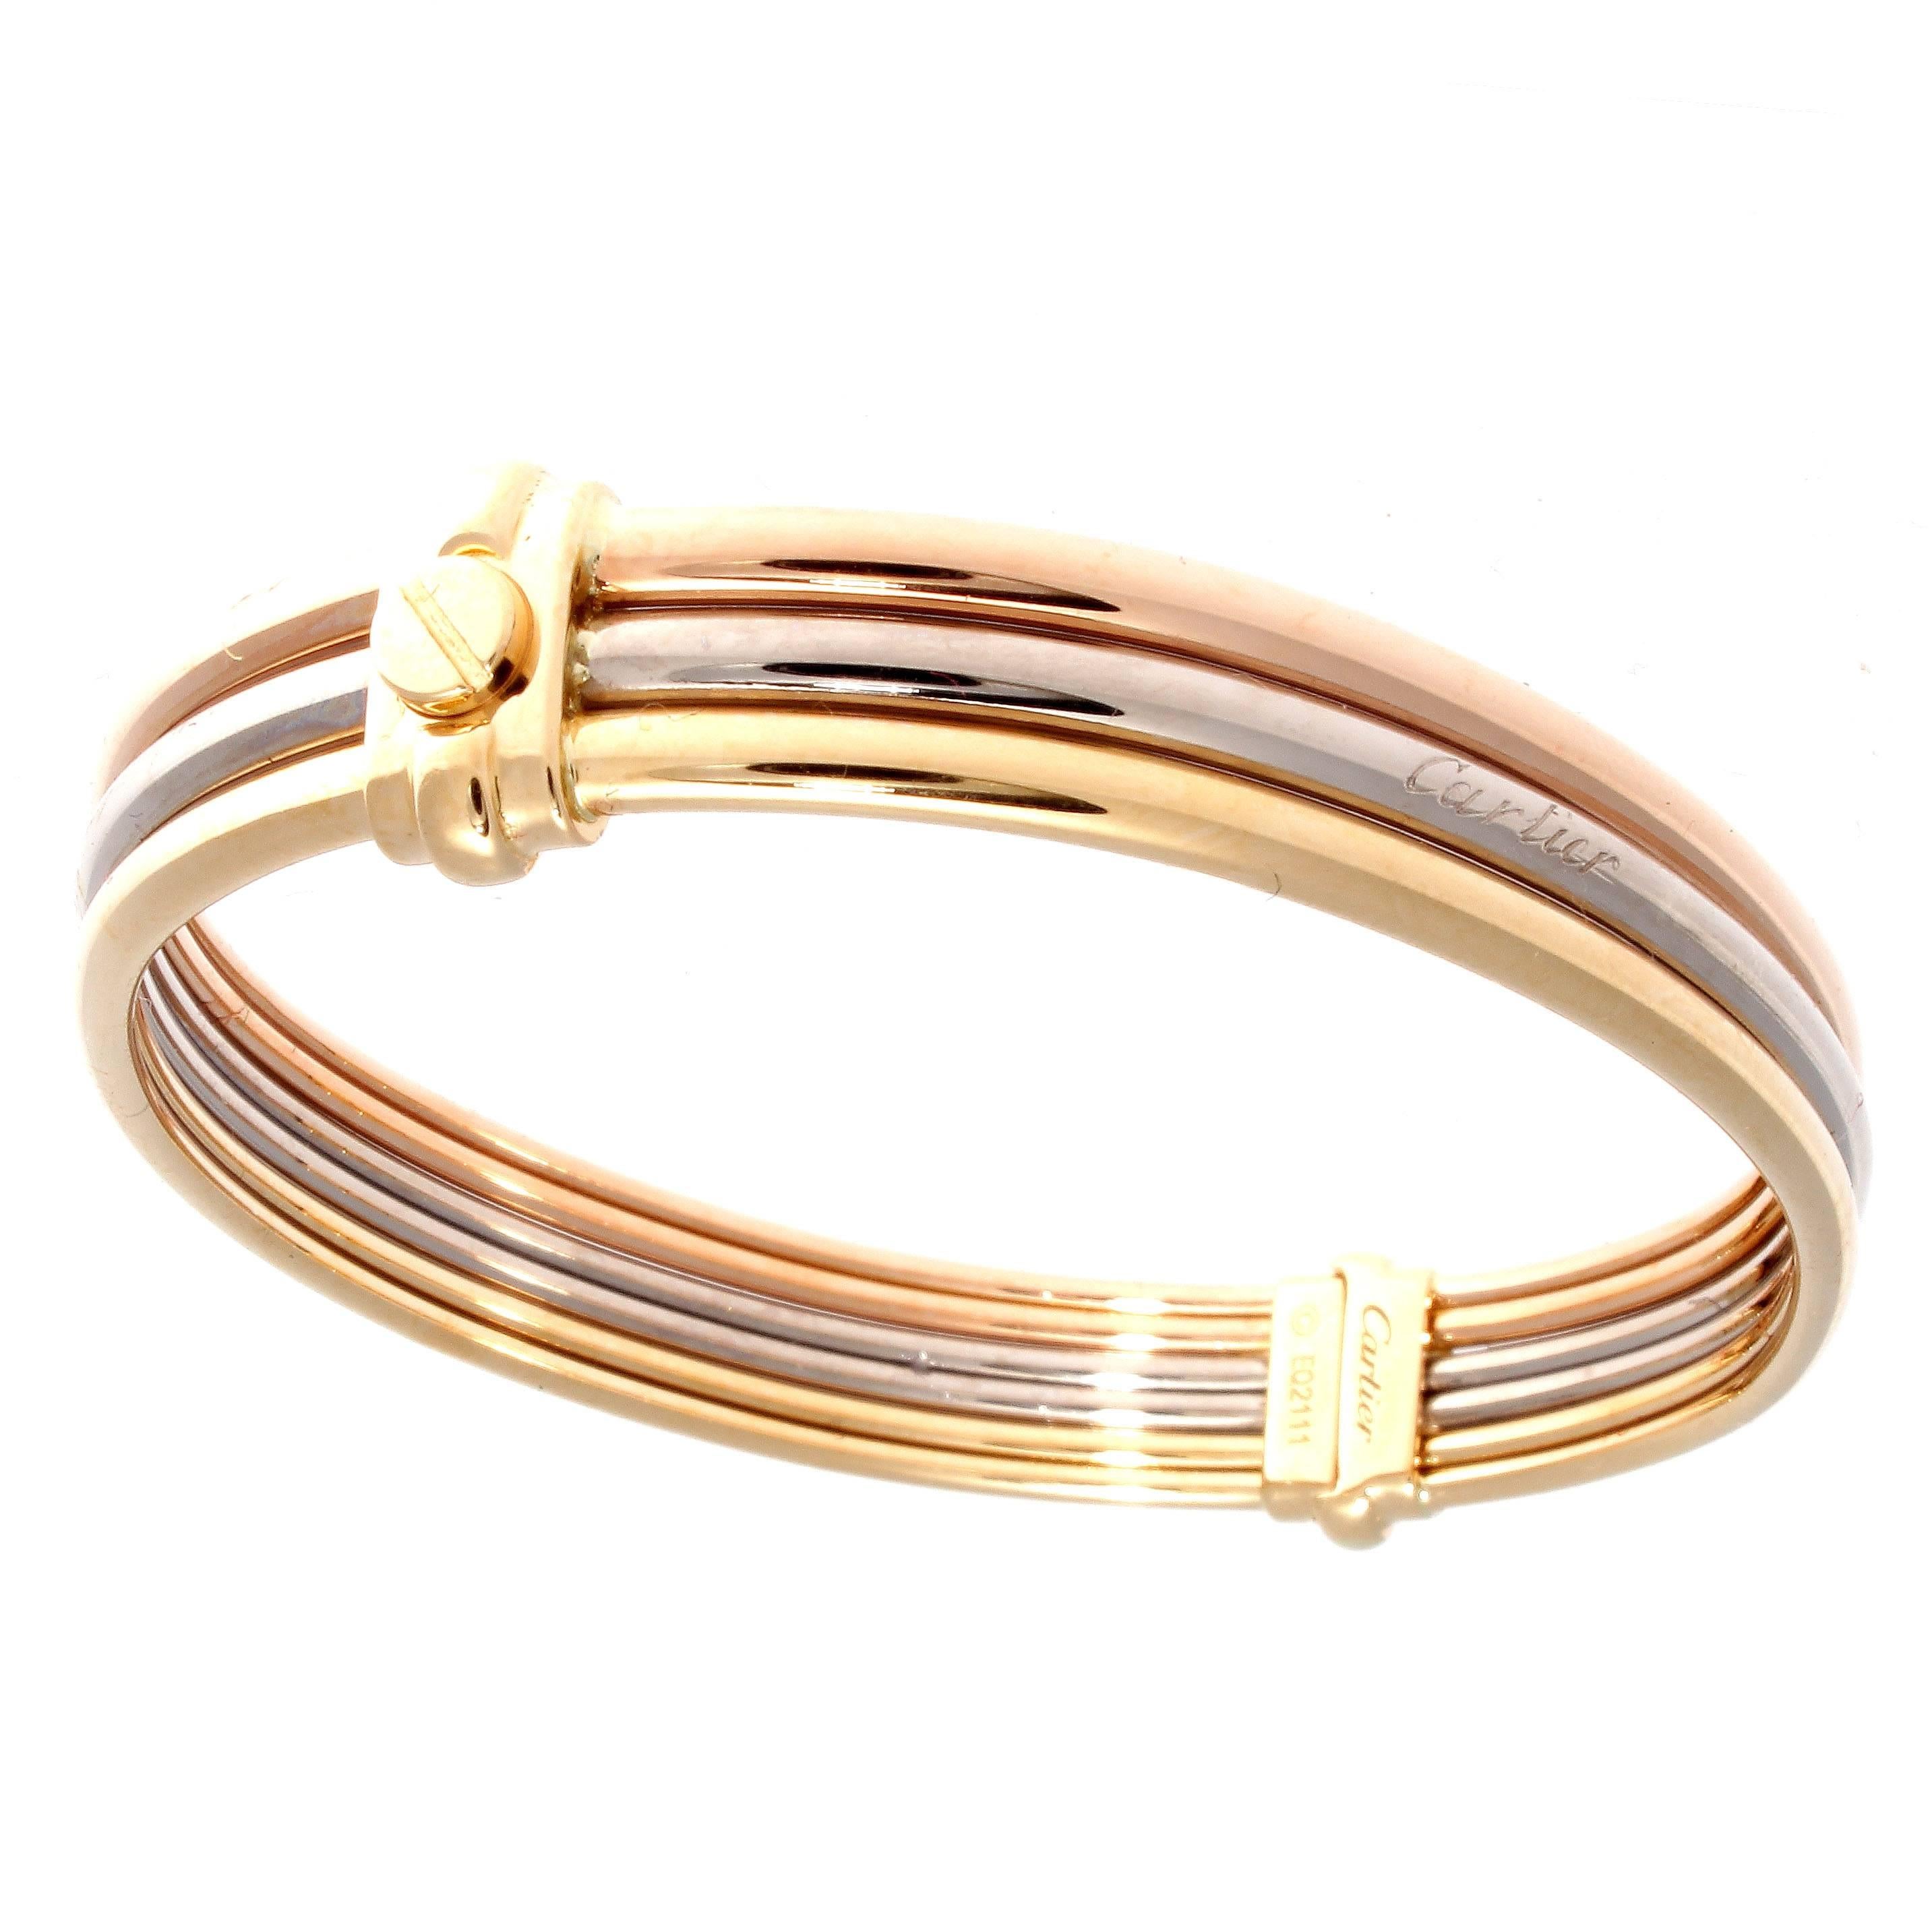 A unique integration of the two most famous designs from Cartier. Cleverly combining the love and trinity collection into one tricolor 18k gold bracelet. Specifically made for Cartier employees and is hardly made available to the public. Signed